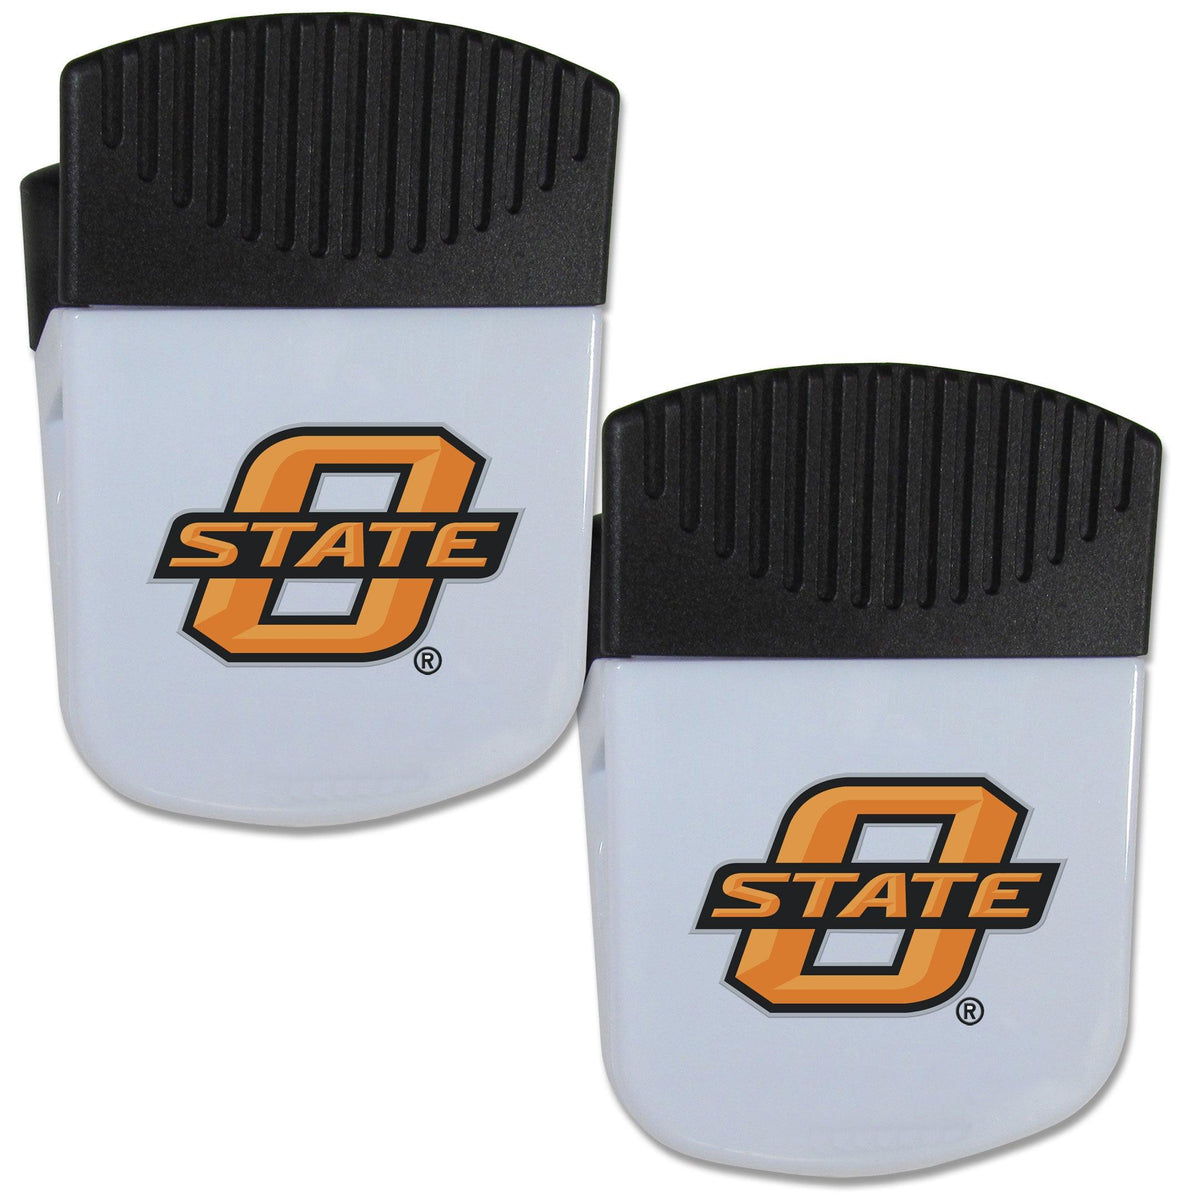 Oklahoma St. Cowboys Chip Clip Magnet with Bottle Opener, 2 pack - Flyclothing LLC